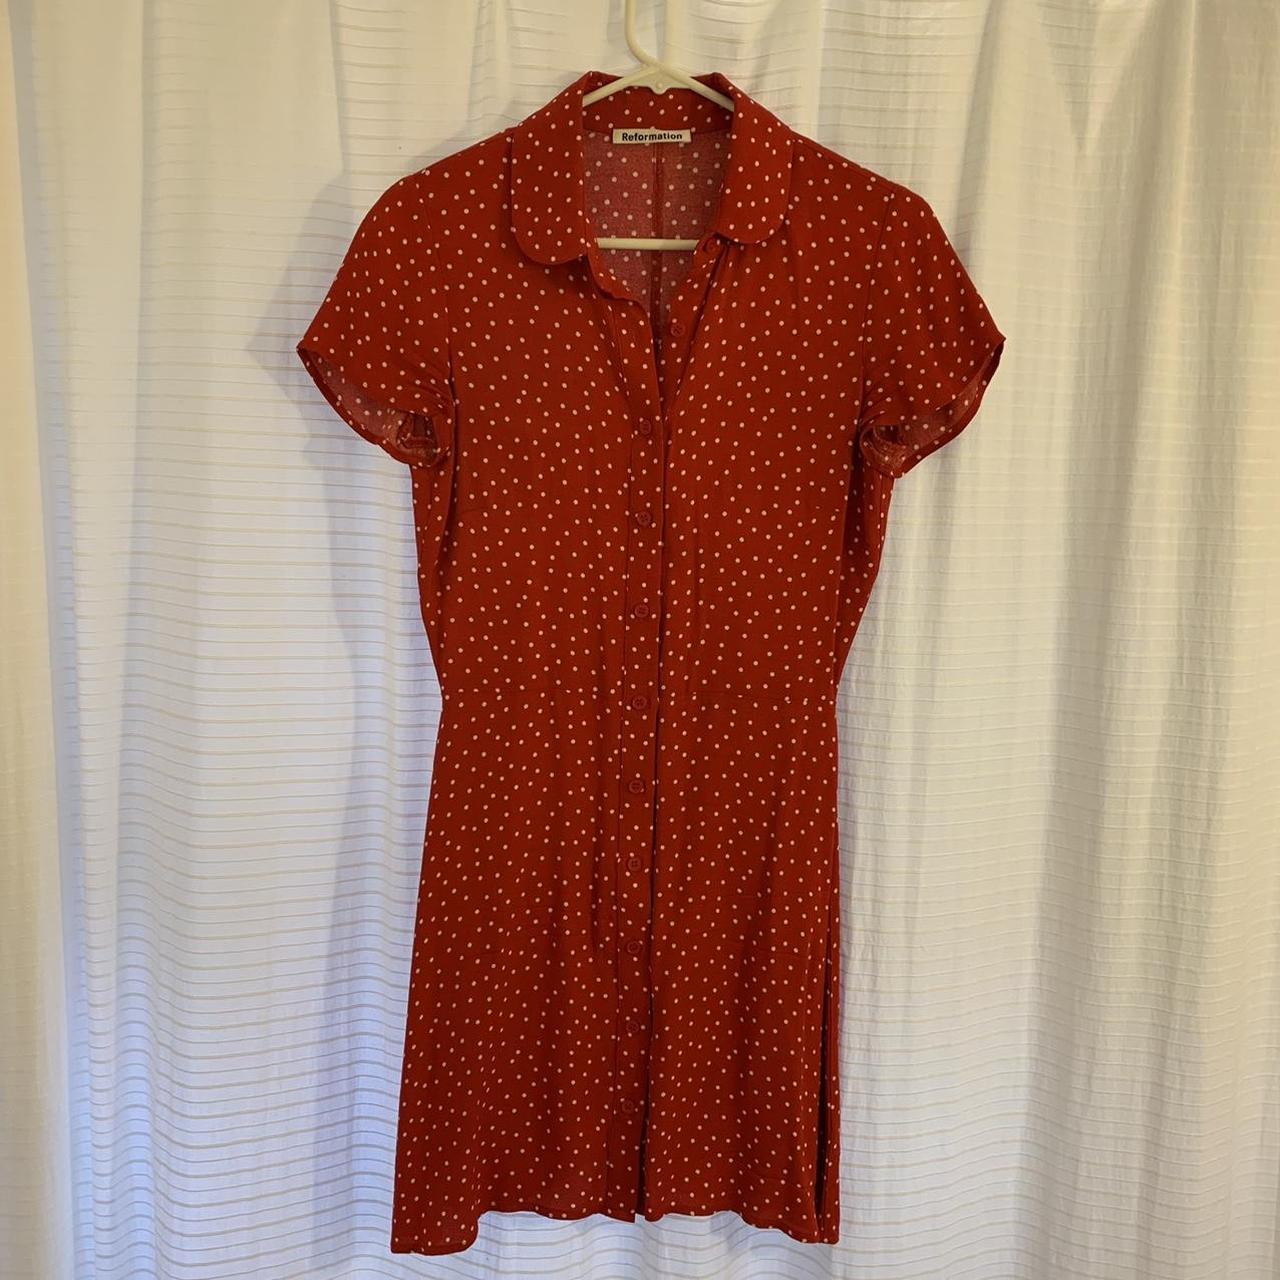 Reformation button up cuuuutie dress in red w/ polka...